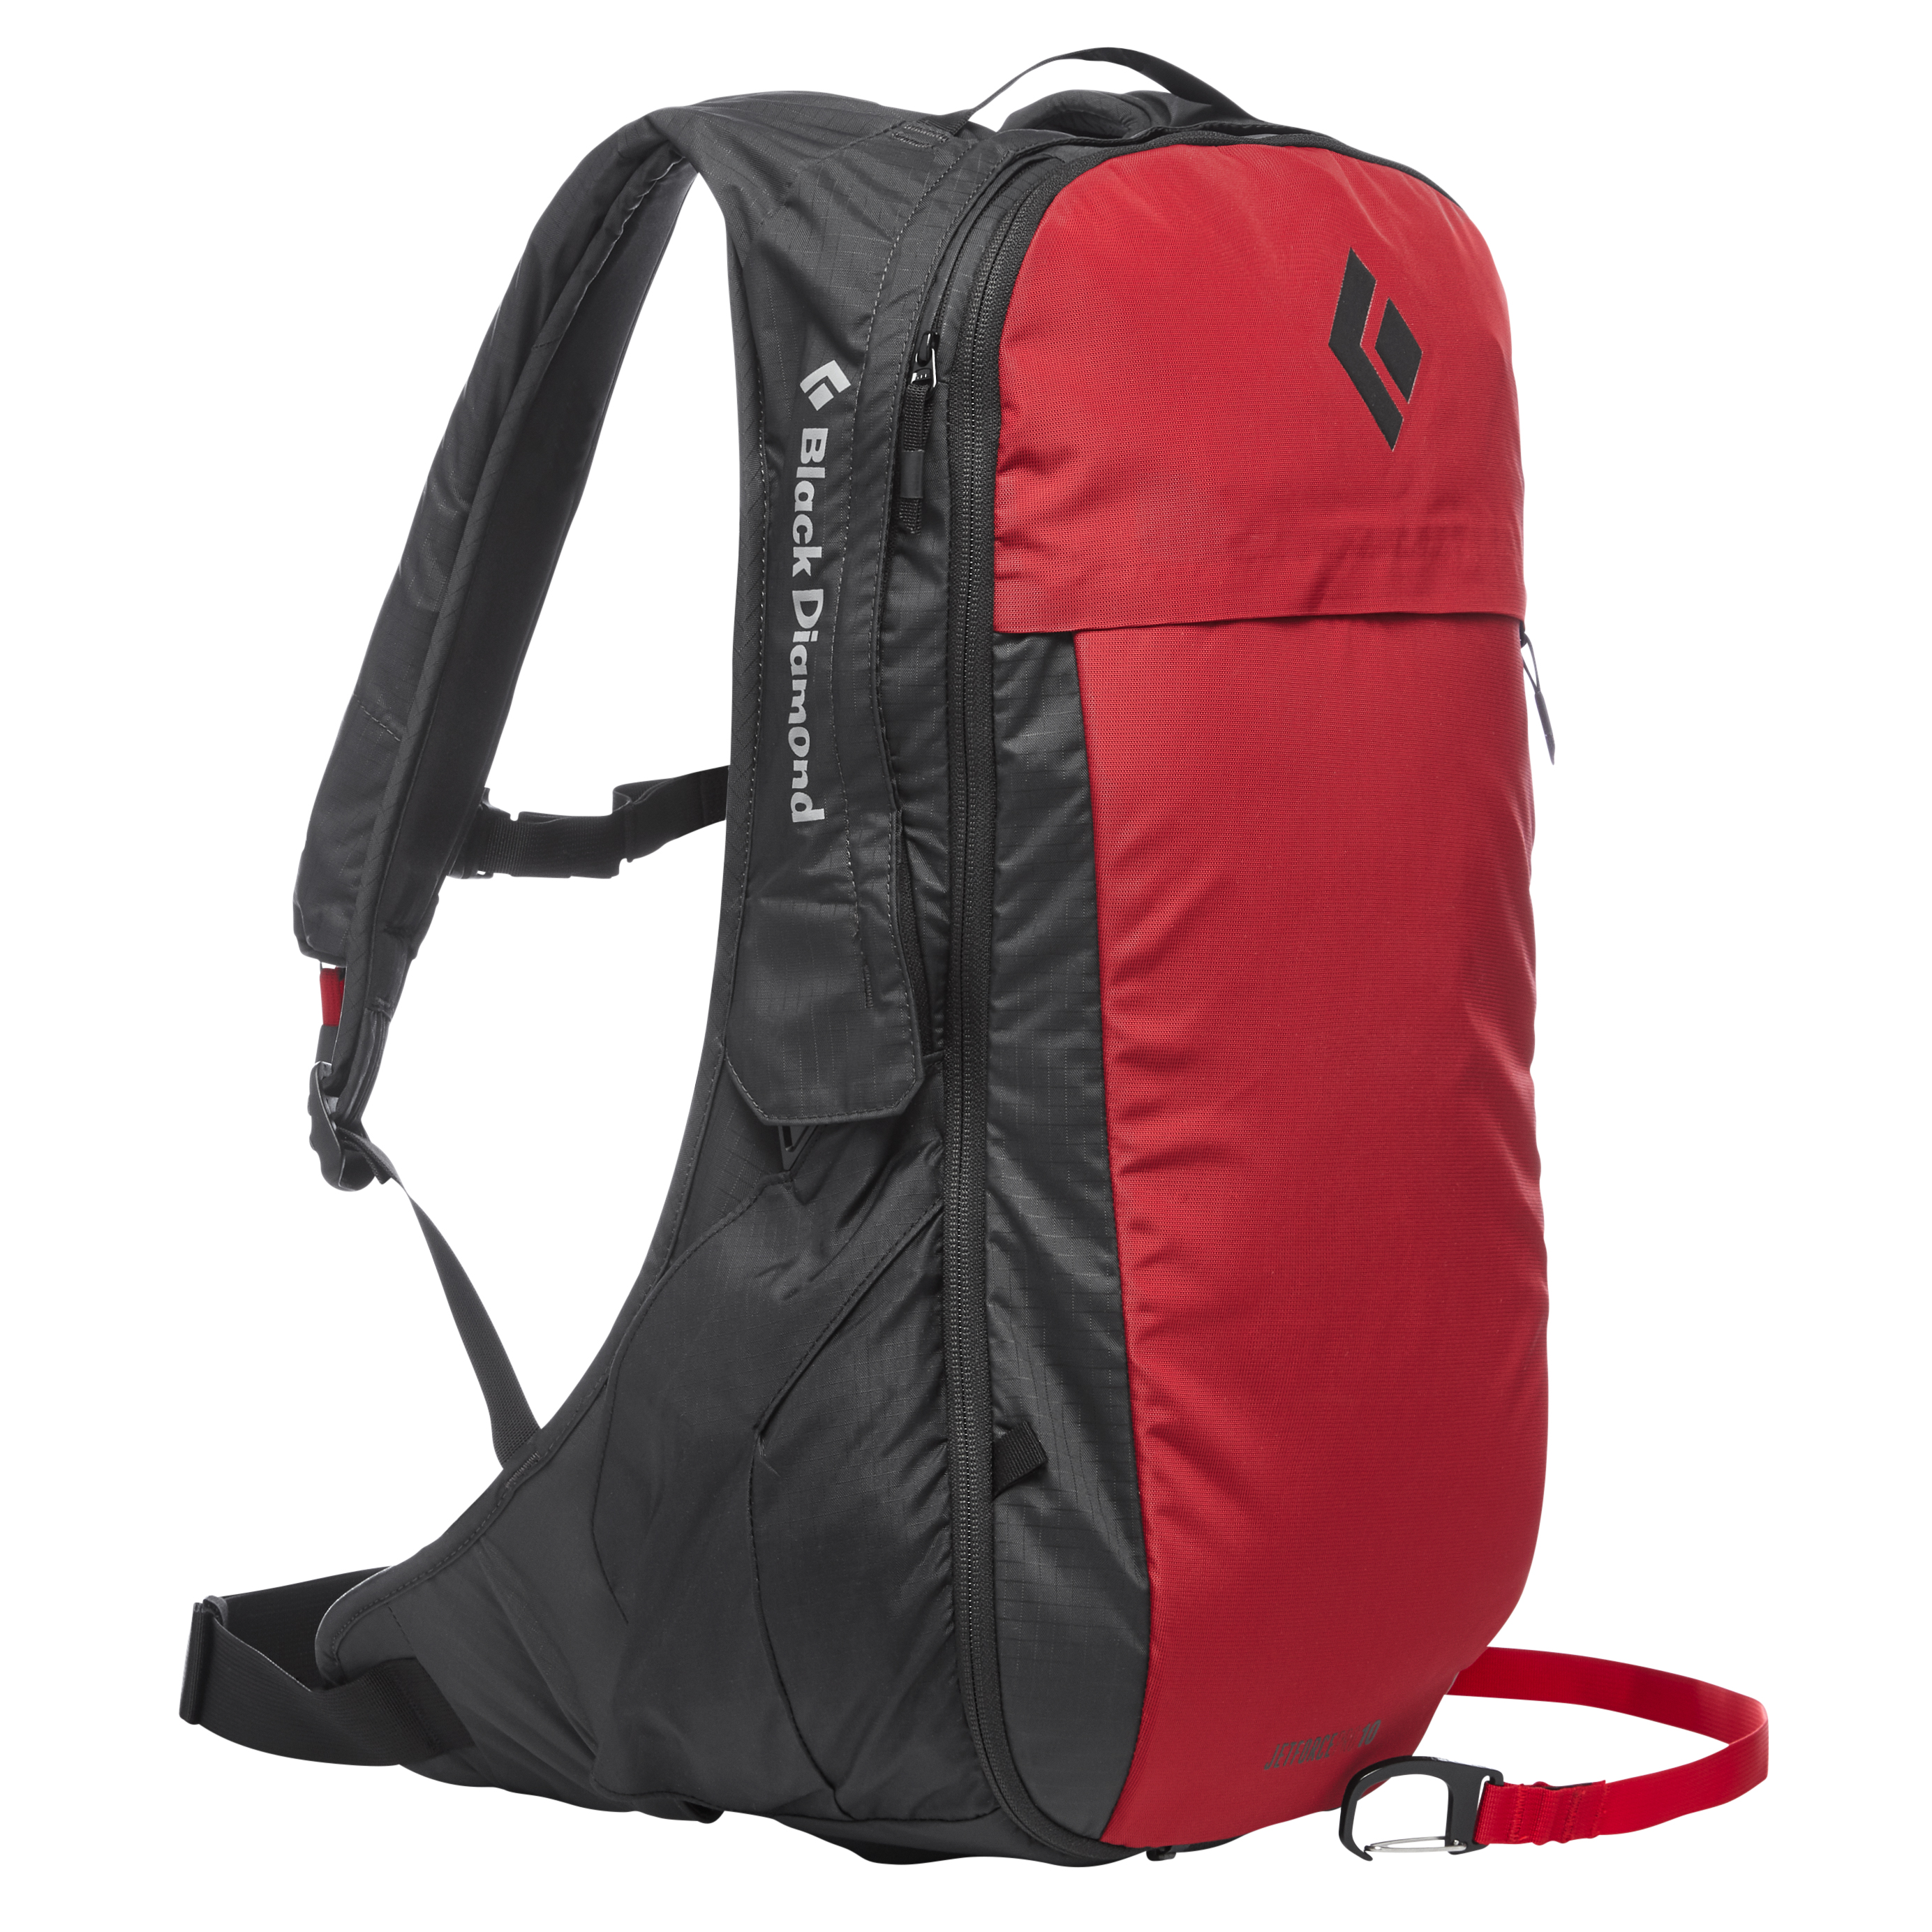 Jetforce Pro Avalanche Airbag Pack 10 L Red